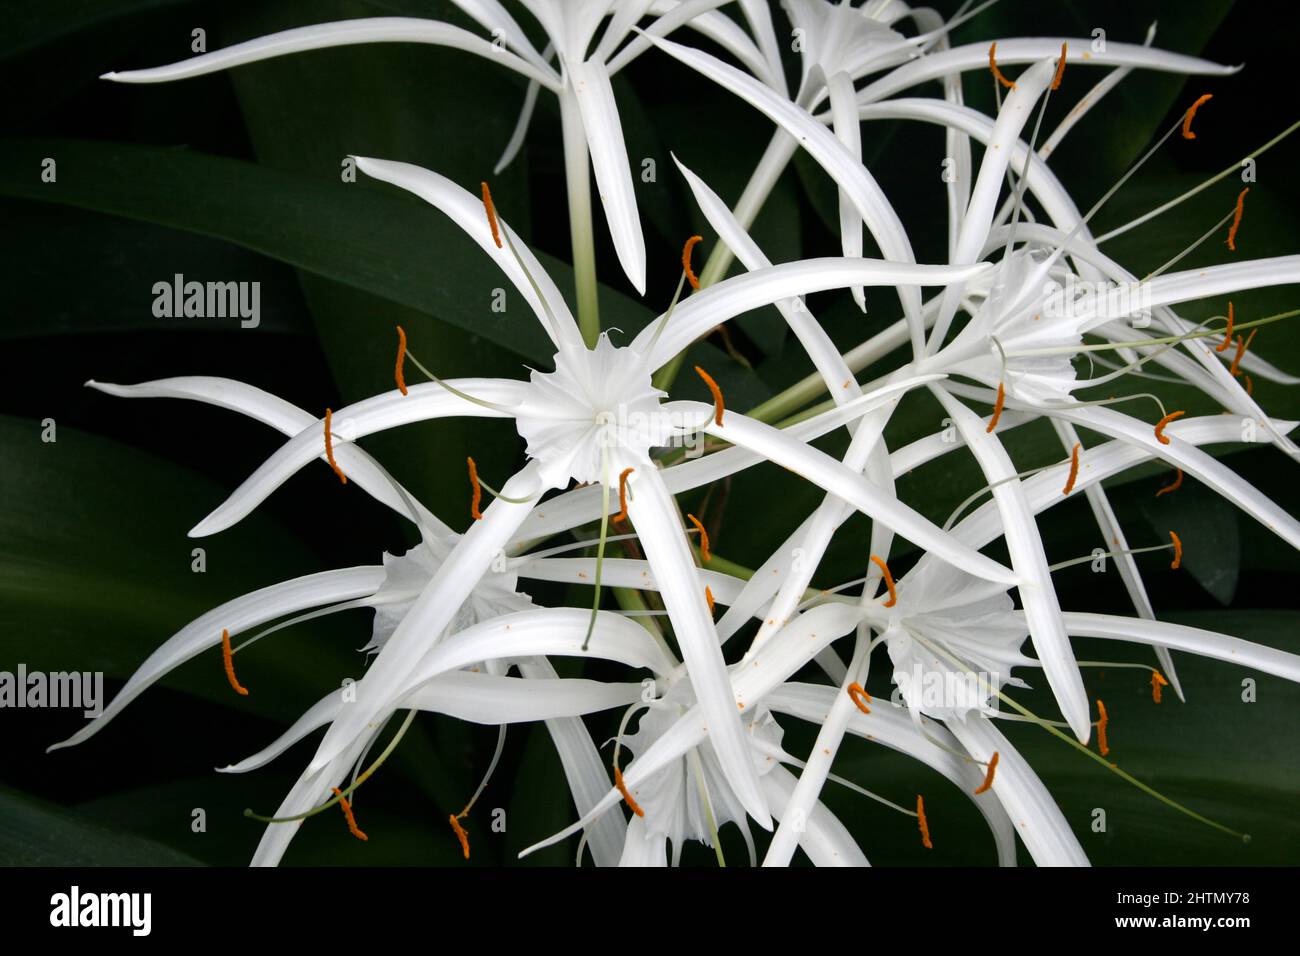 HYMENOCALLIS FLOWERS COMMONLY KNOWN AS SPIDER LILIES. Stock Photo